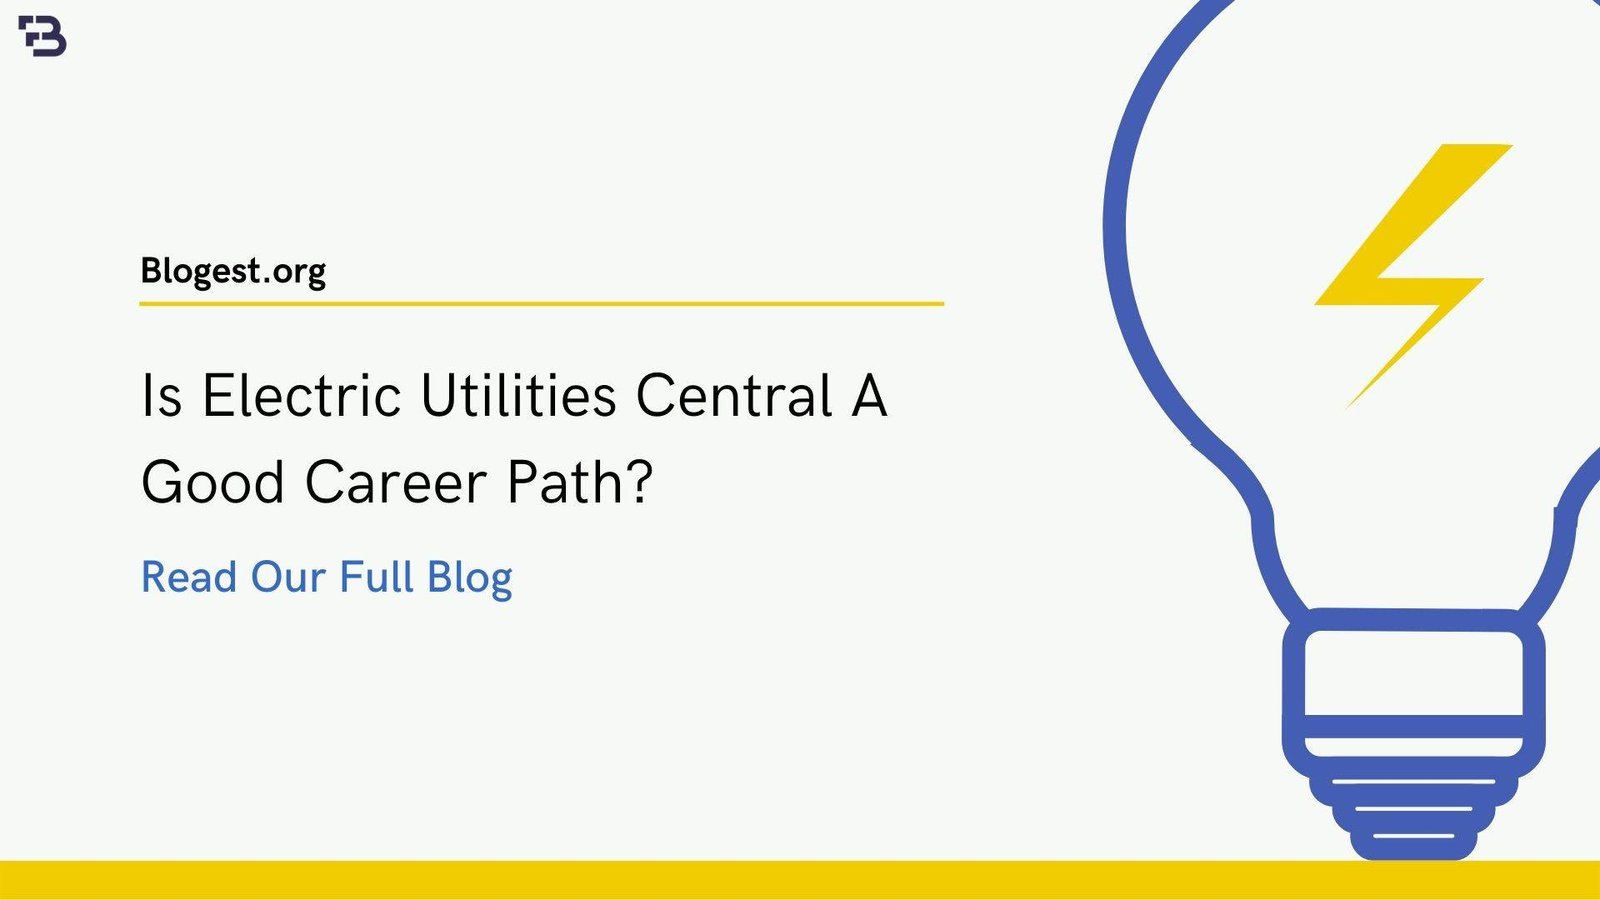 Is Electric Utilities Central A Good Career Path?